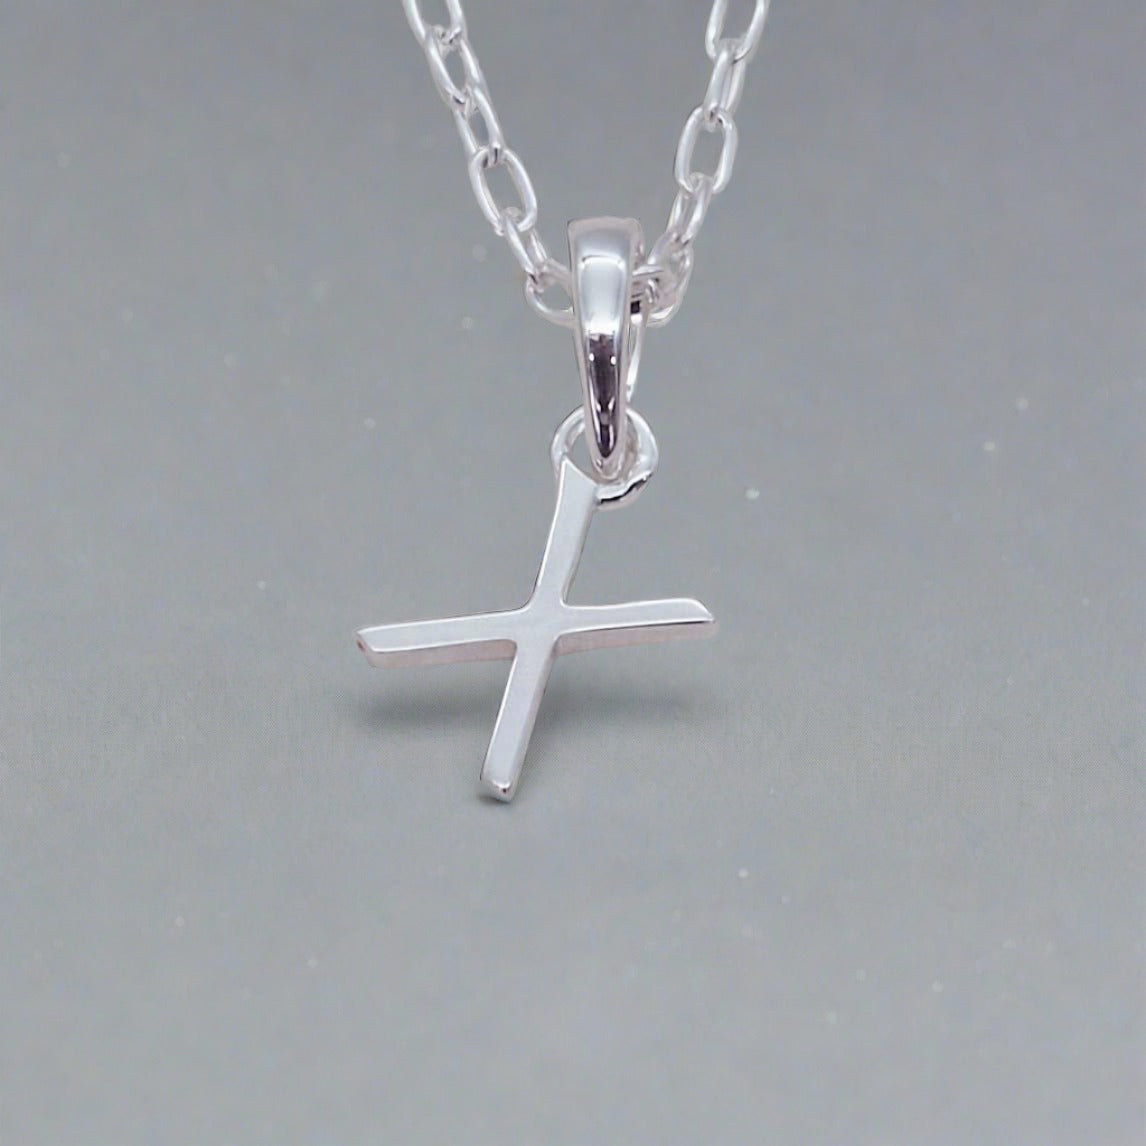 Silver Initial Pendant Necklace - womens jewellery by indie and harper